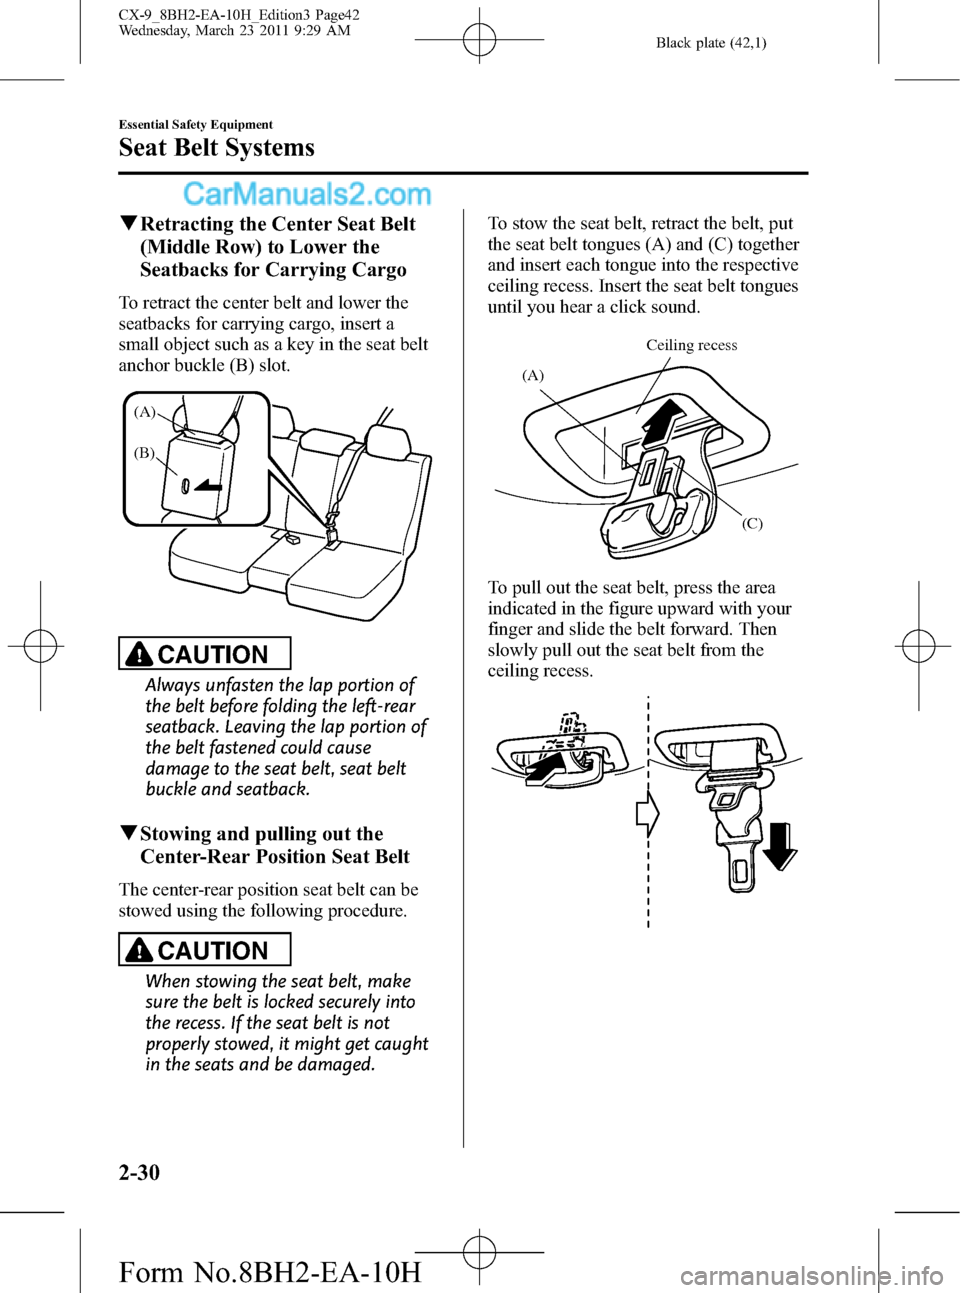 MAZDA MODEL CX-9 2011   (in English) Service Manual Black plate (42,1)
qRetracting the Center Seat Belt
(Middle Row) to Lower the
Seatbacks for Carrying Cargo
To retract the center belt and lower the
seatbacks for carrying cargo, insert a
small object 